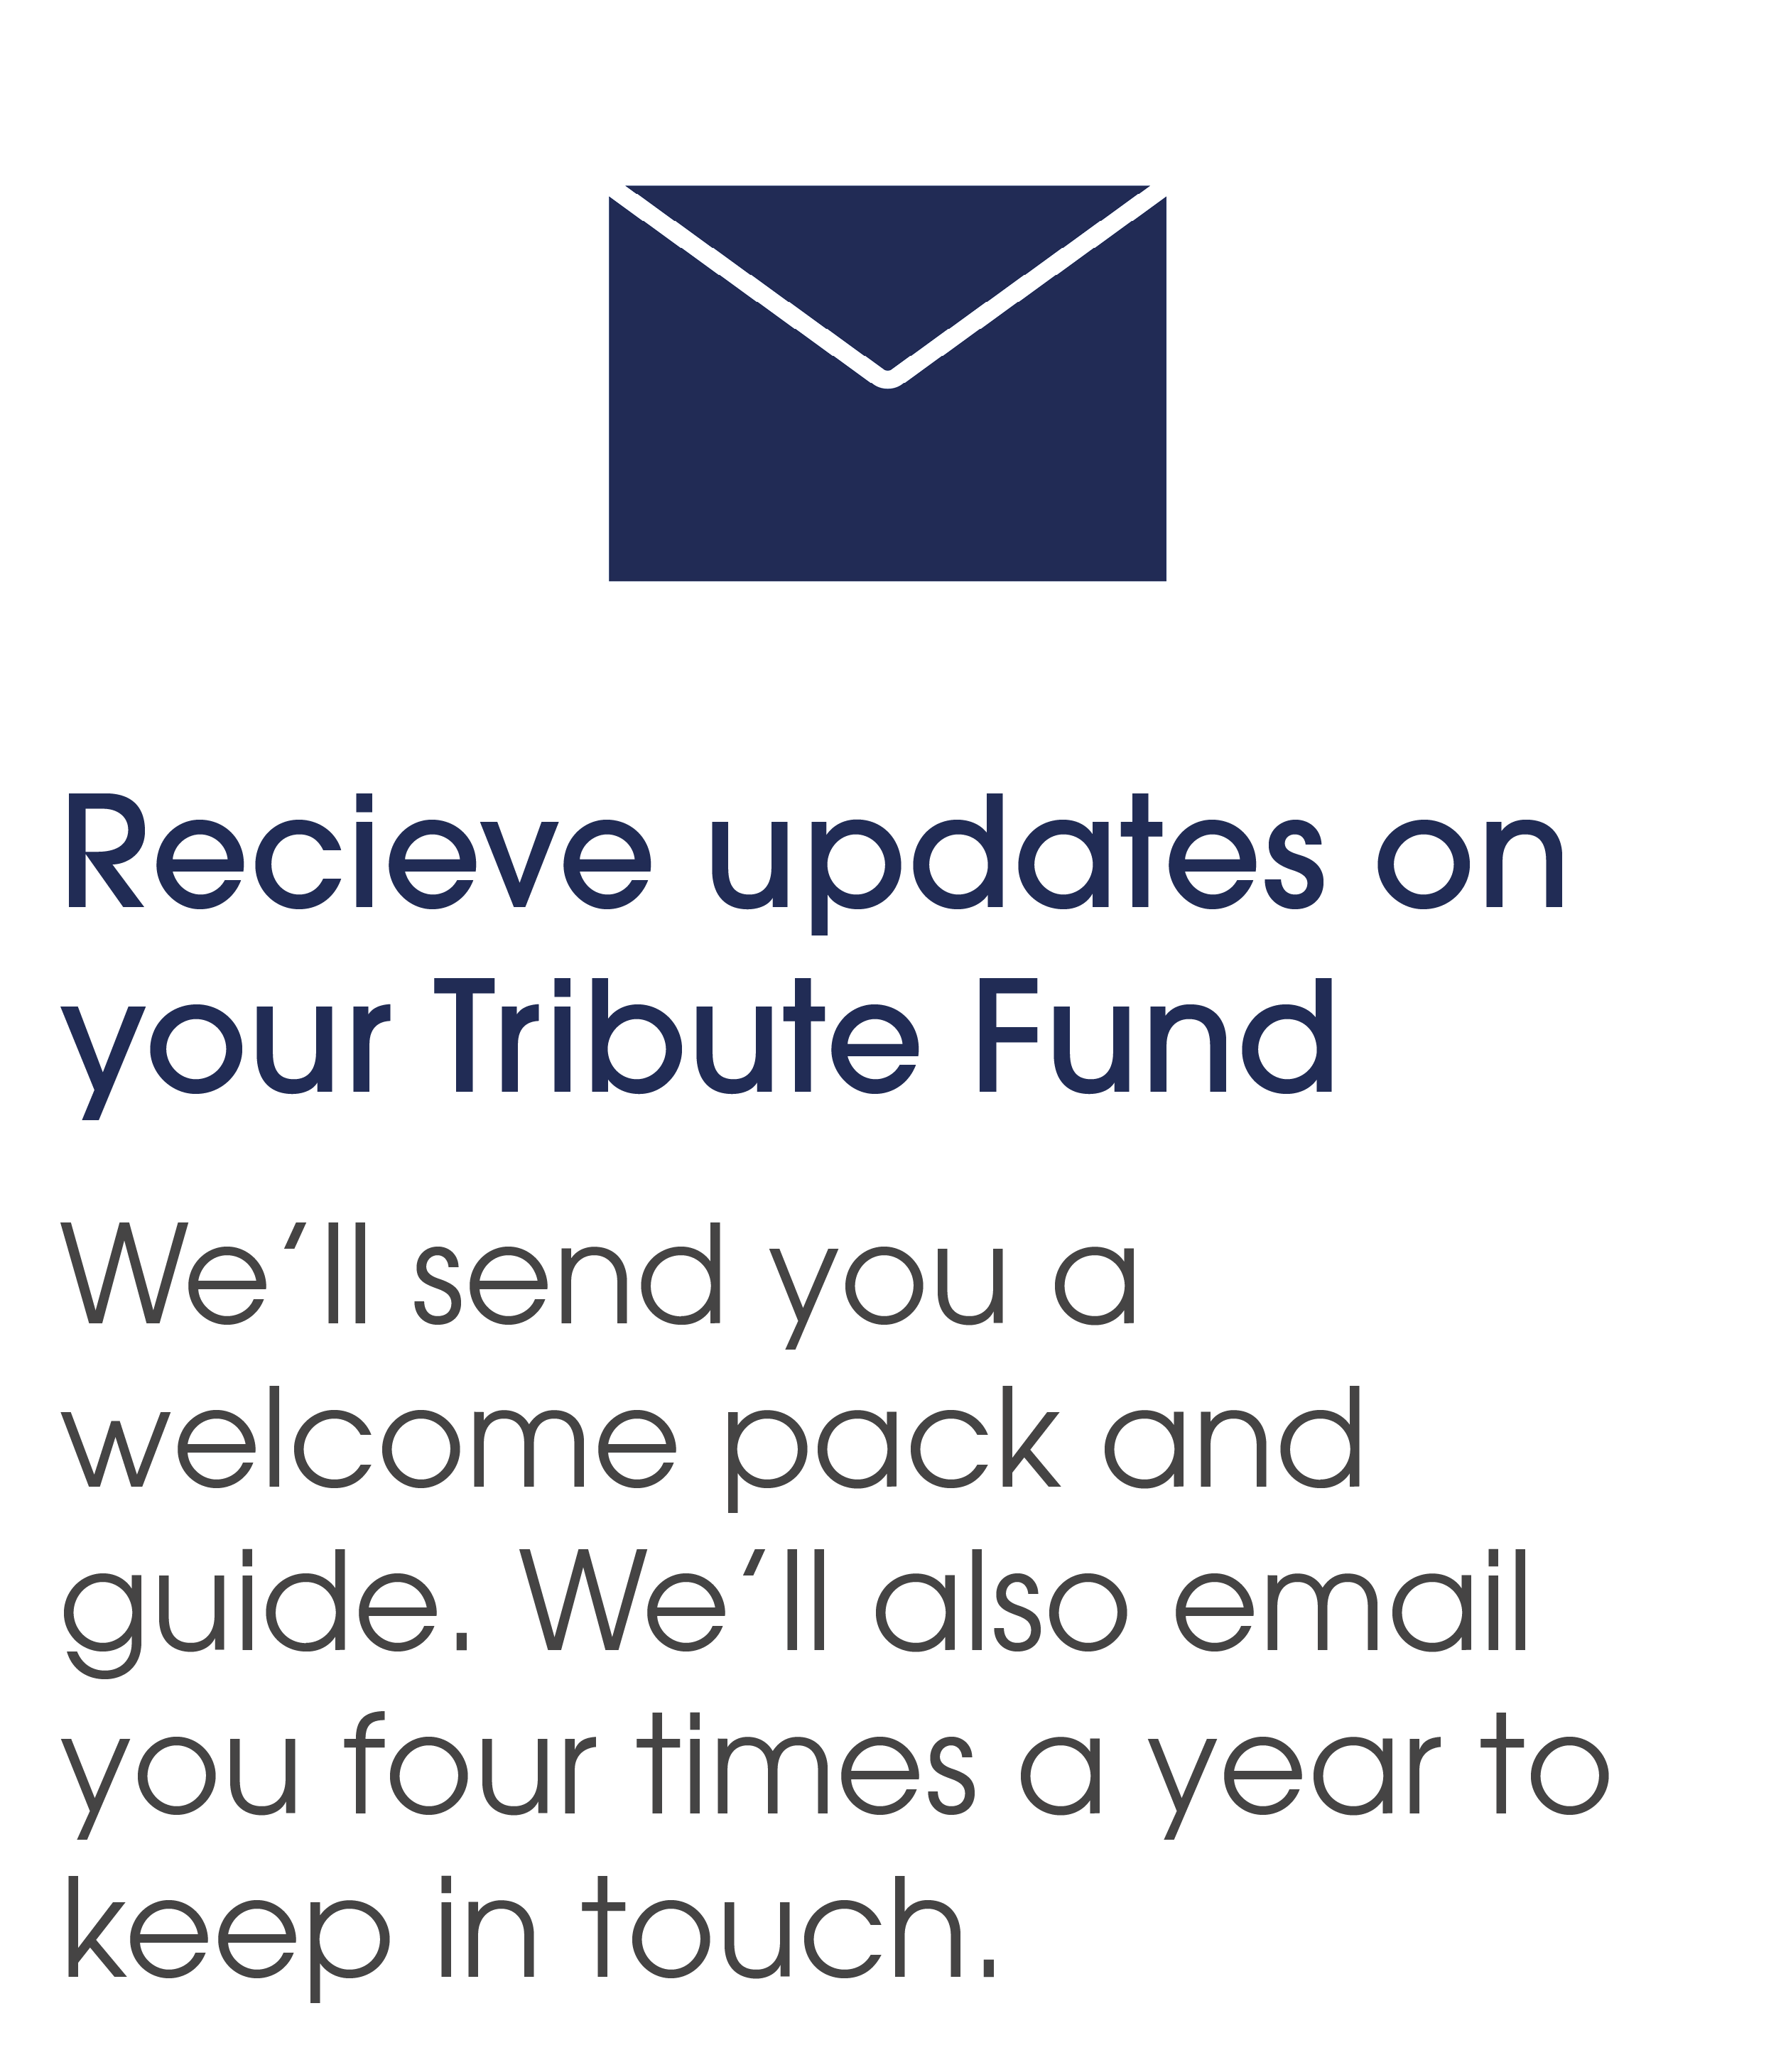 Receive updates on your Tribute Fund. We'll send you a welcome pack and guide. We'll also email you four times a year to keep in touch. 